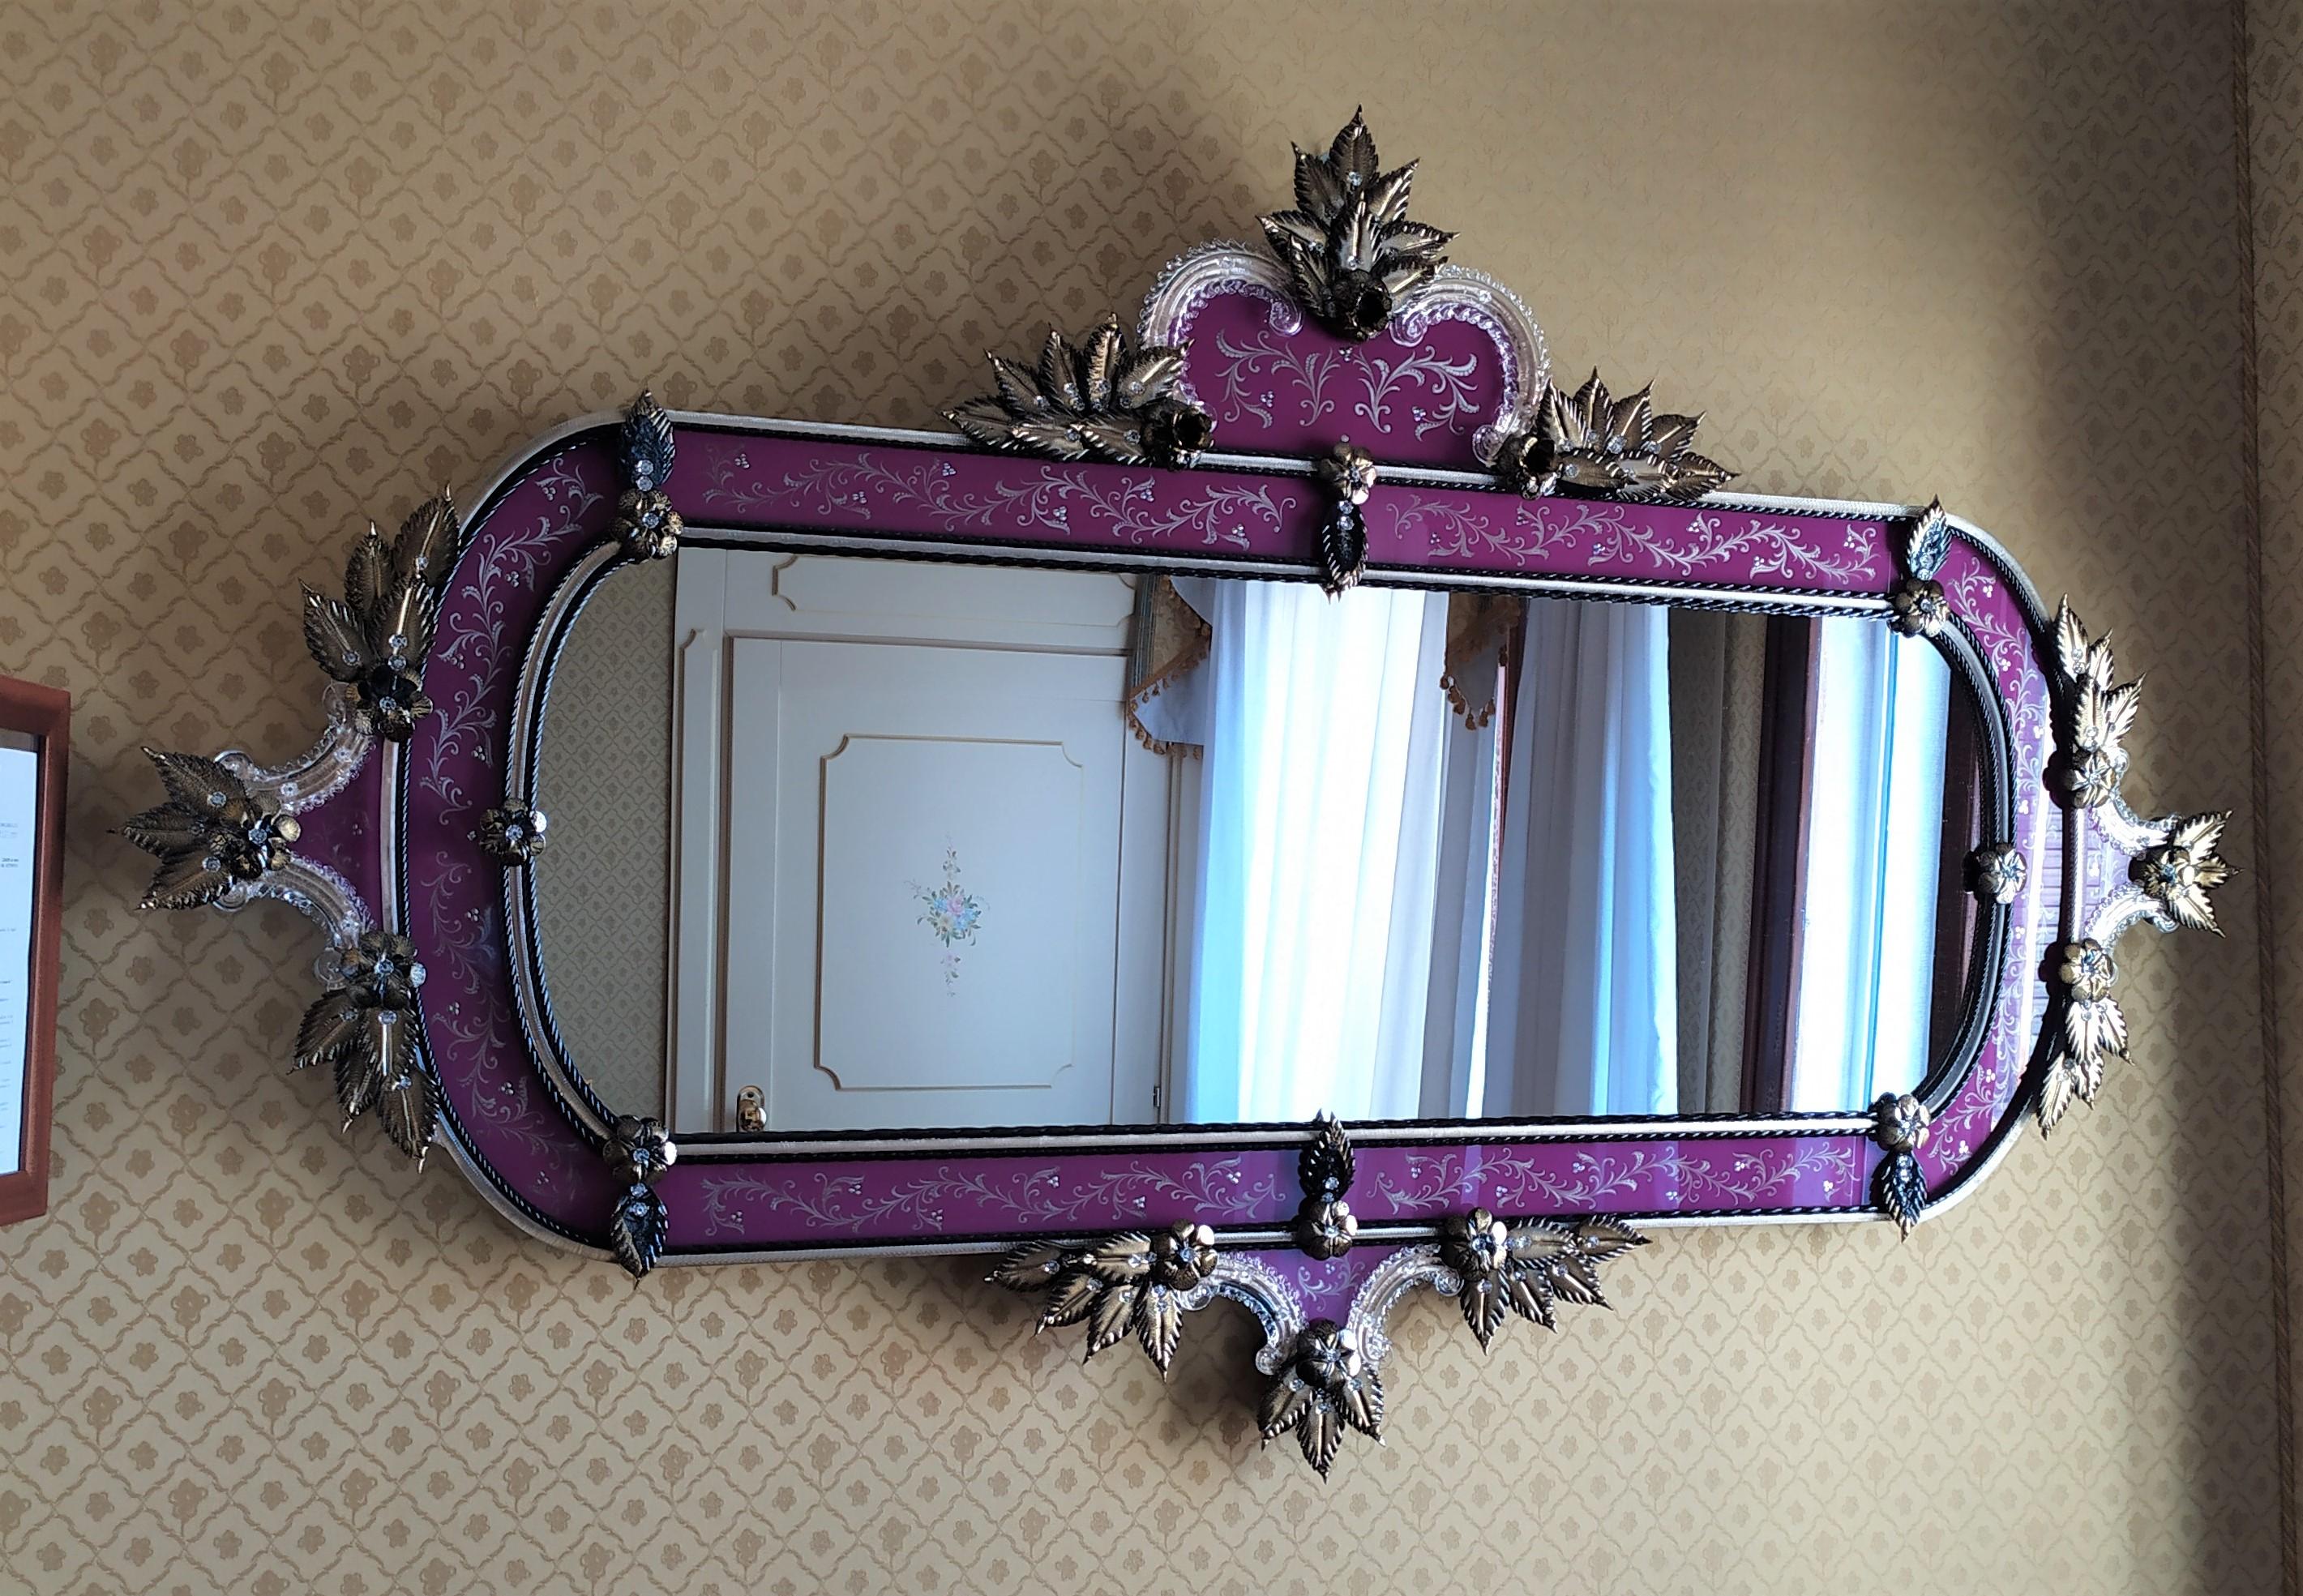 Horizontal mirror in Venetian style, revisited in colors.
Murano glass mirror, with hand-engraved frame made according to the ancient Muranese traditions in purple color, with black gold-colored reeds, leaves and flowers.
The mirror is made